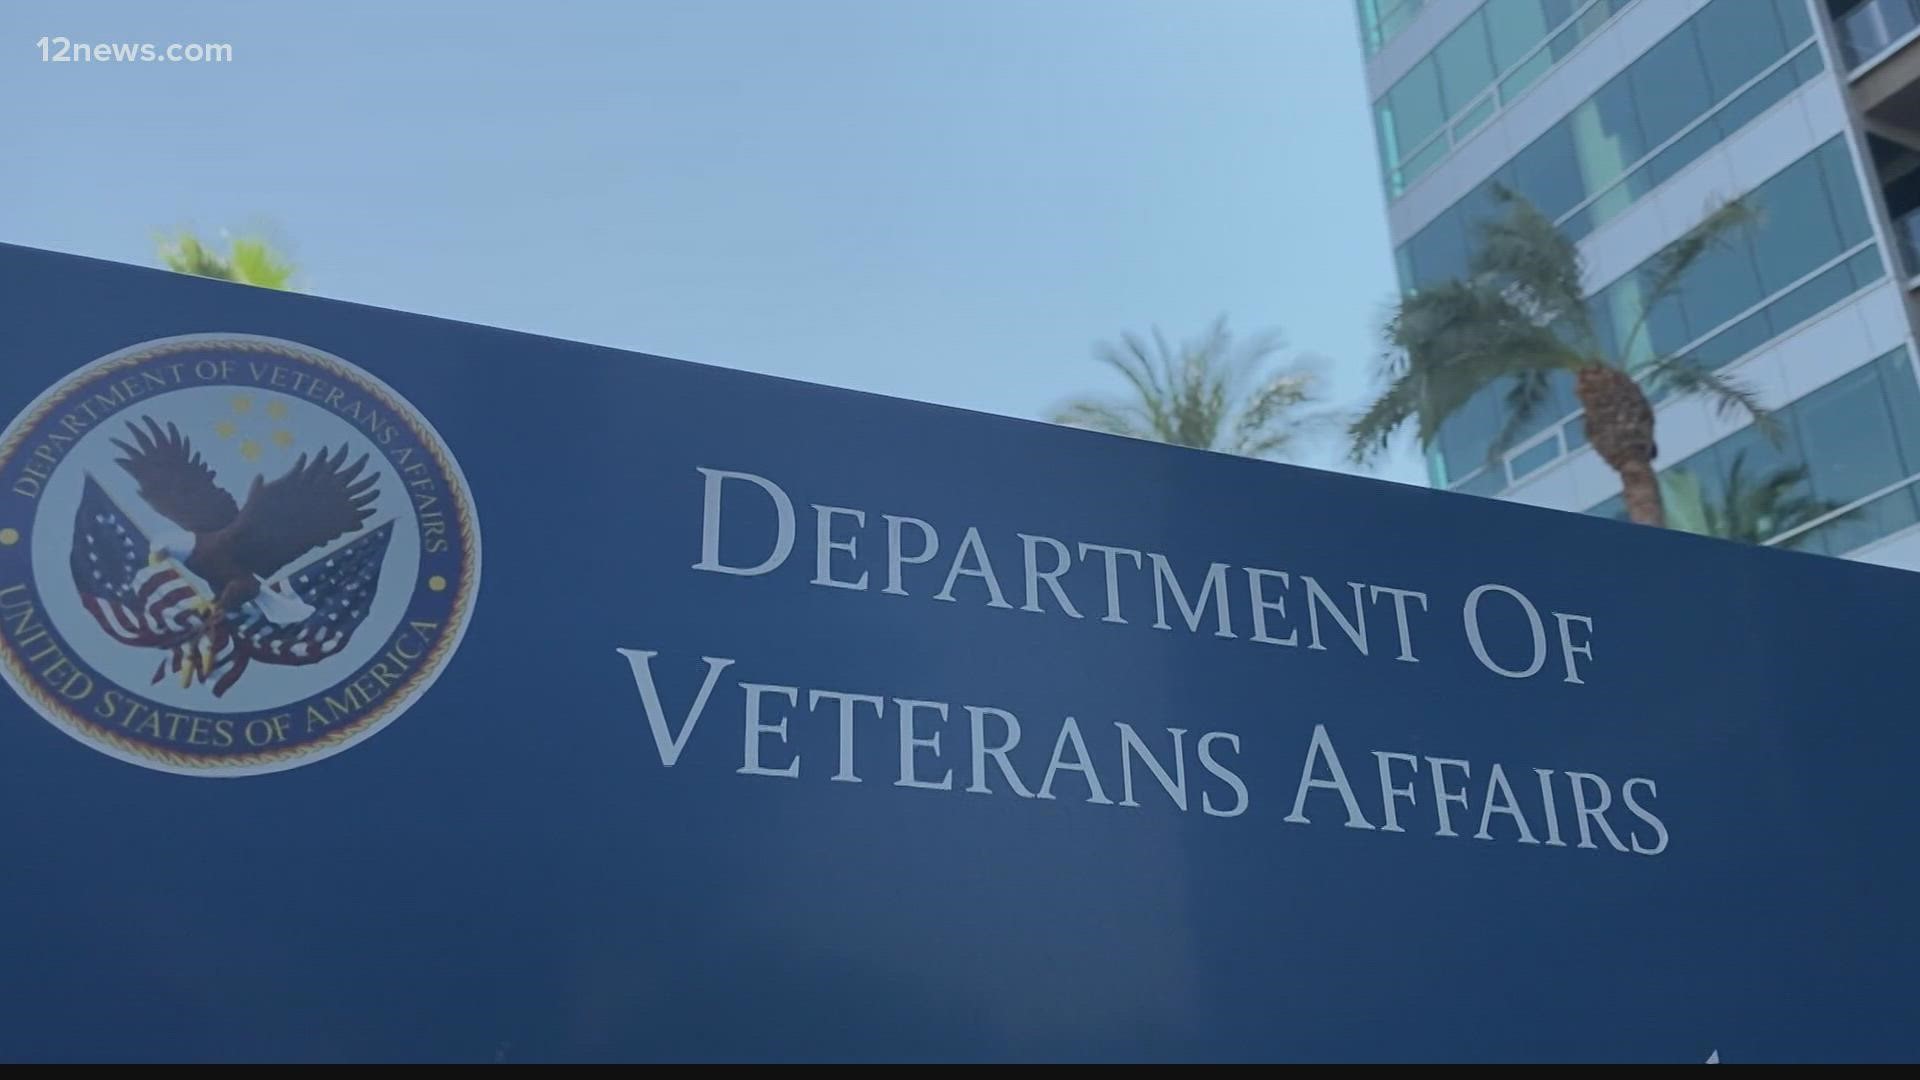 Current events around the world, including America's withdrawal from Afghanistan and the pandemic, have been a lot to process for the country's veterans.